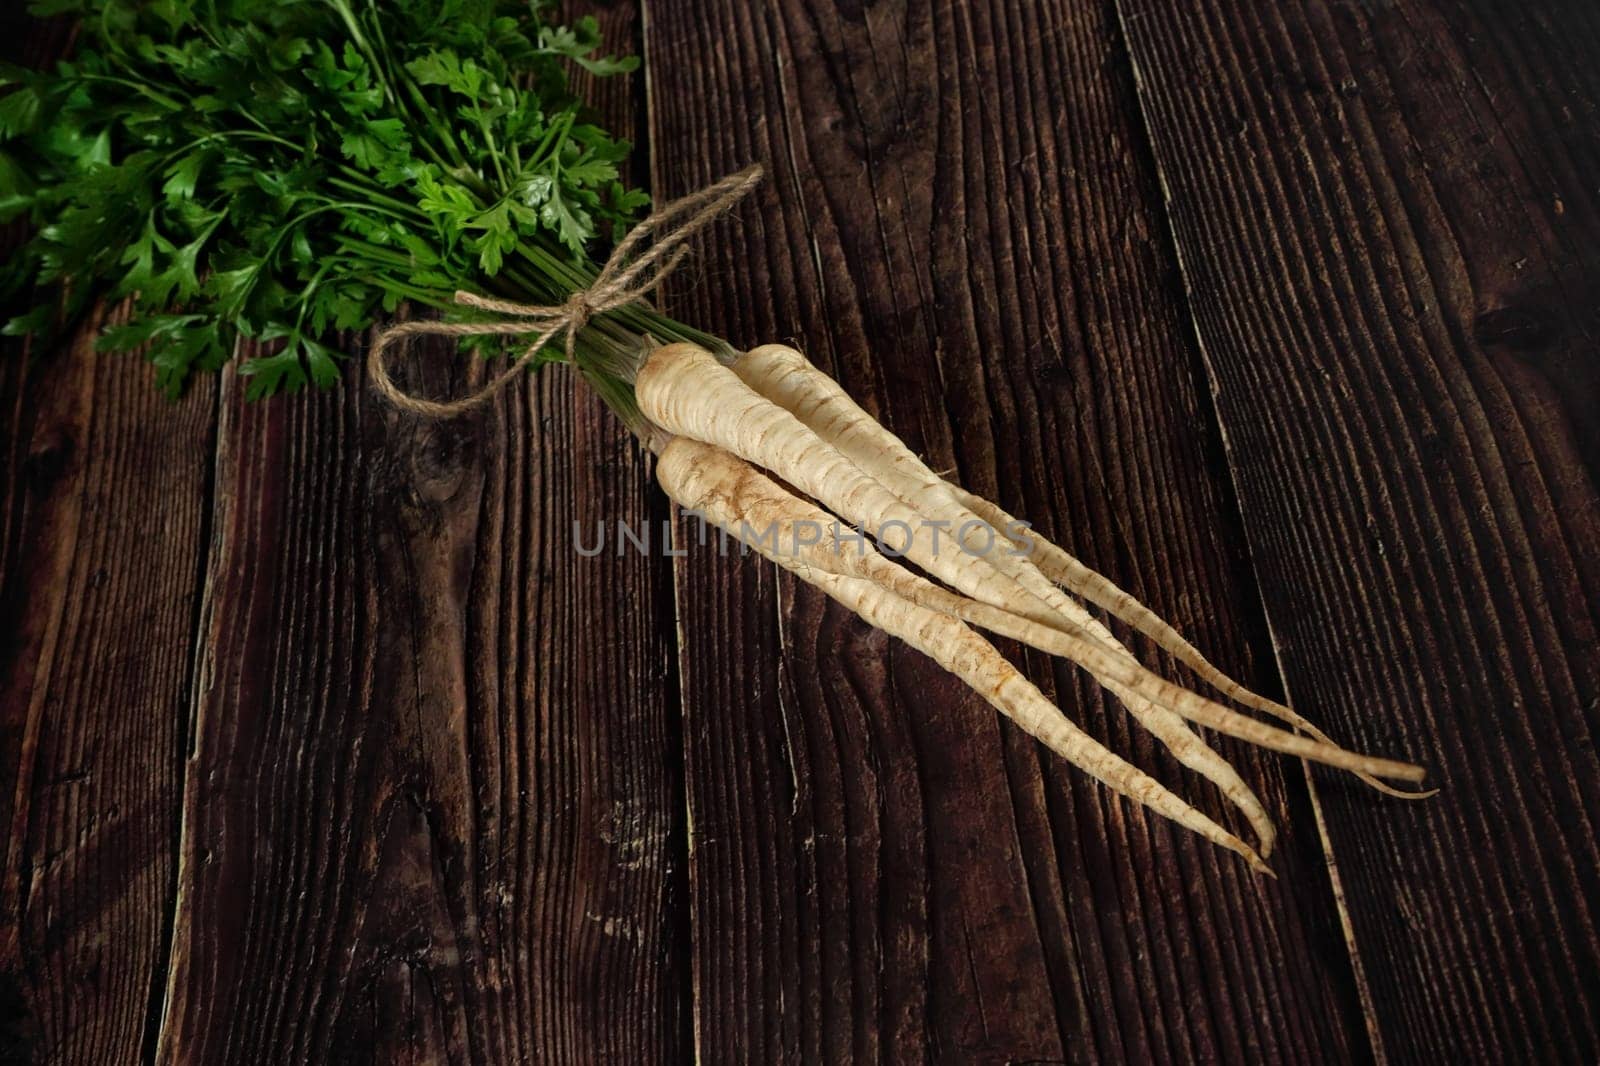 Bunch of parsley / parsnip roots with green leaves lying on dark wooden rustic board by Ivanko